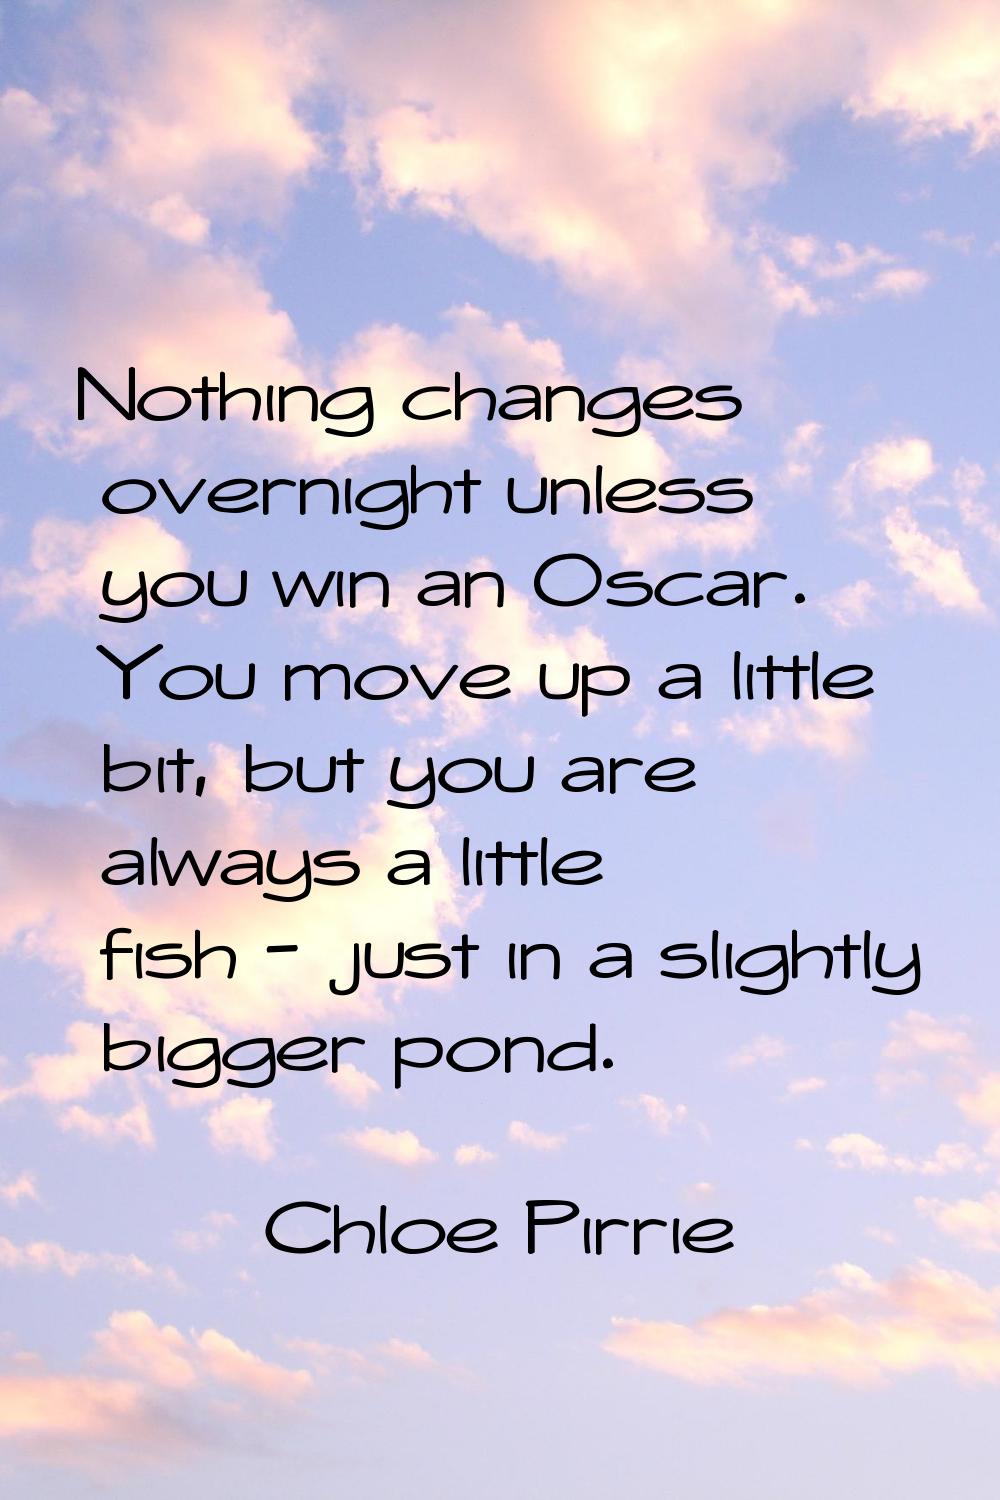 Nothing changes overnight unless you win an Oscar. You move up a little bit, but you are always a l